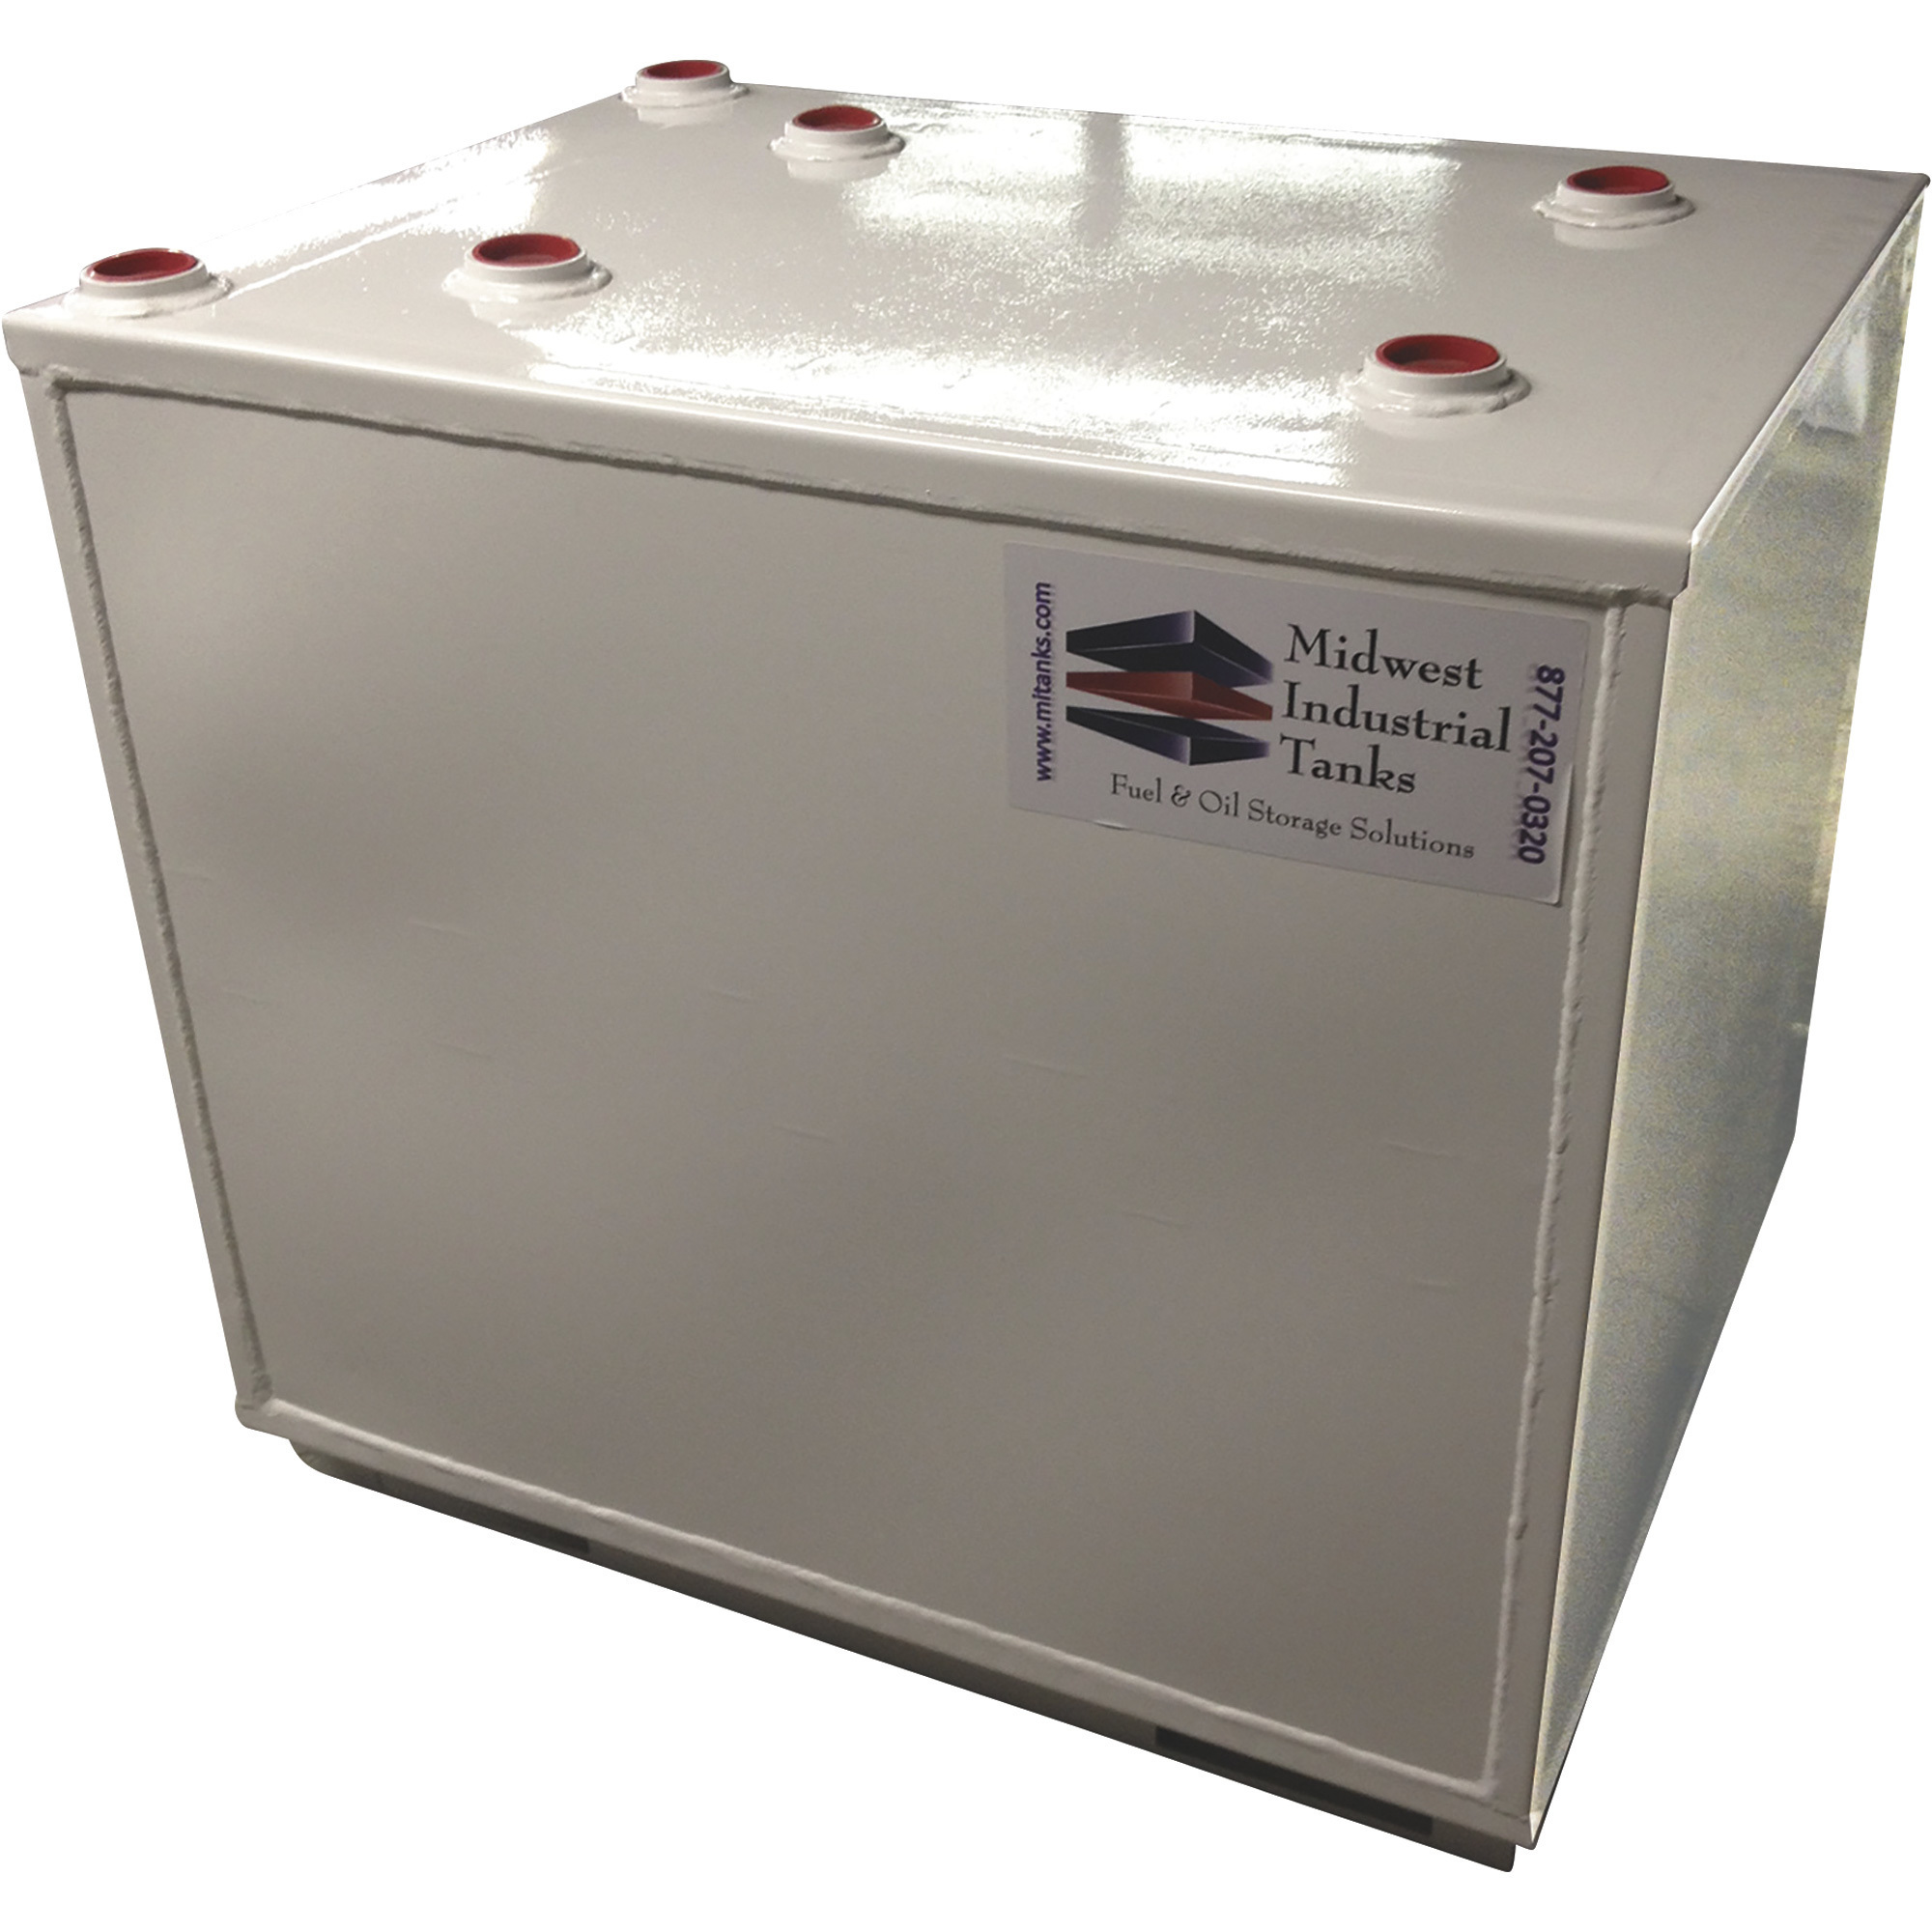 Midwest Industrial Tanks Double-Wall Storage Fuel Tank, 50-Gallon, Model RTD-50-CC-10-12